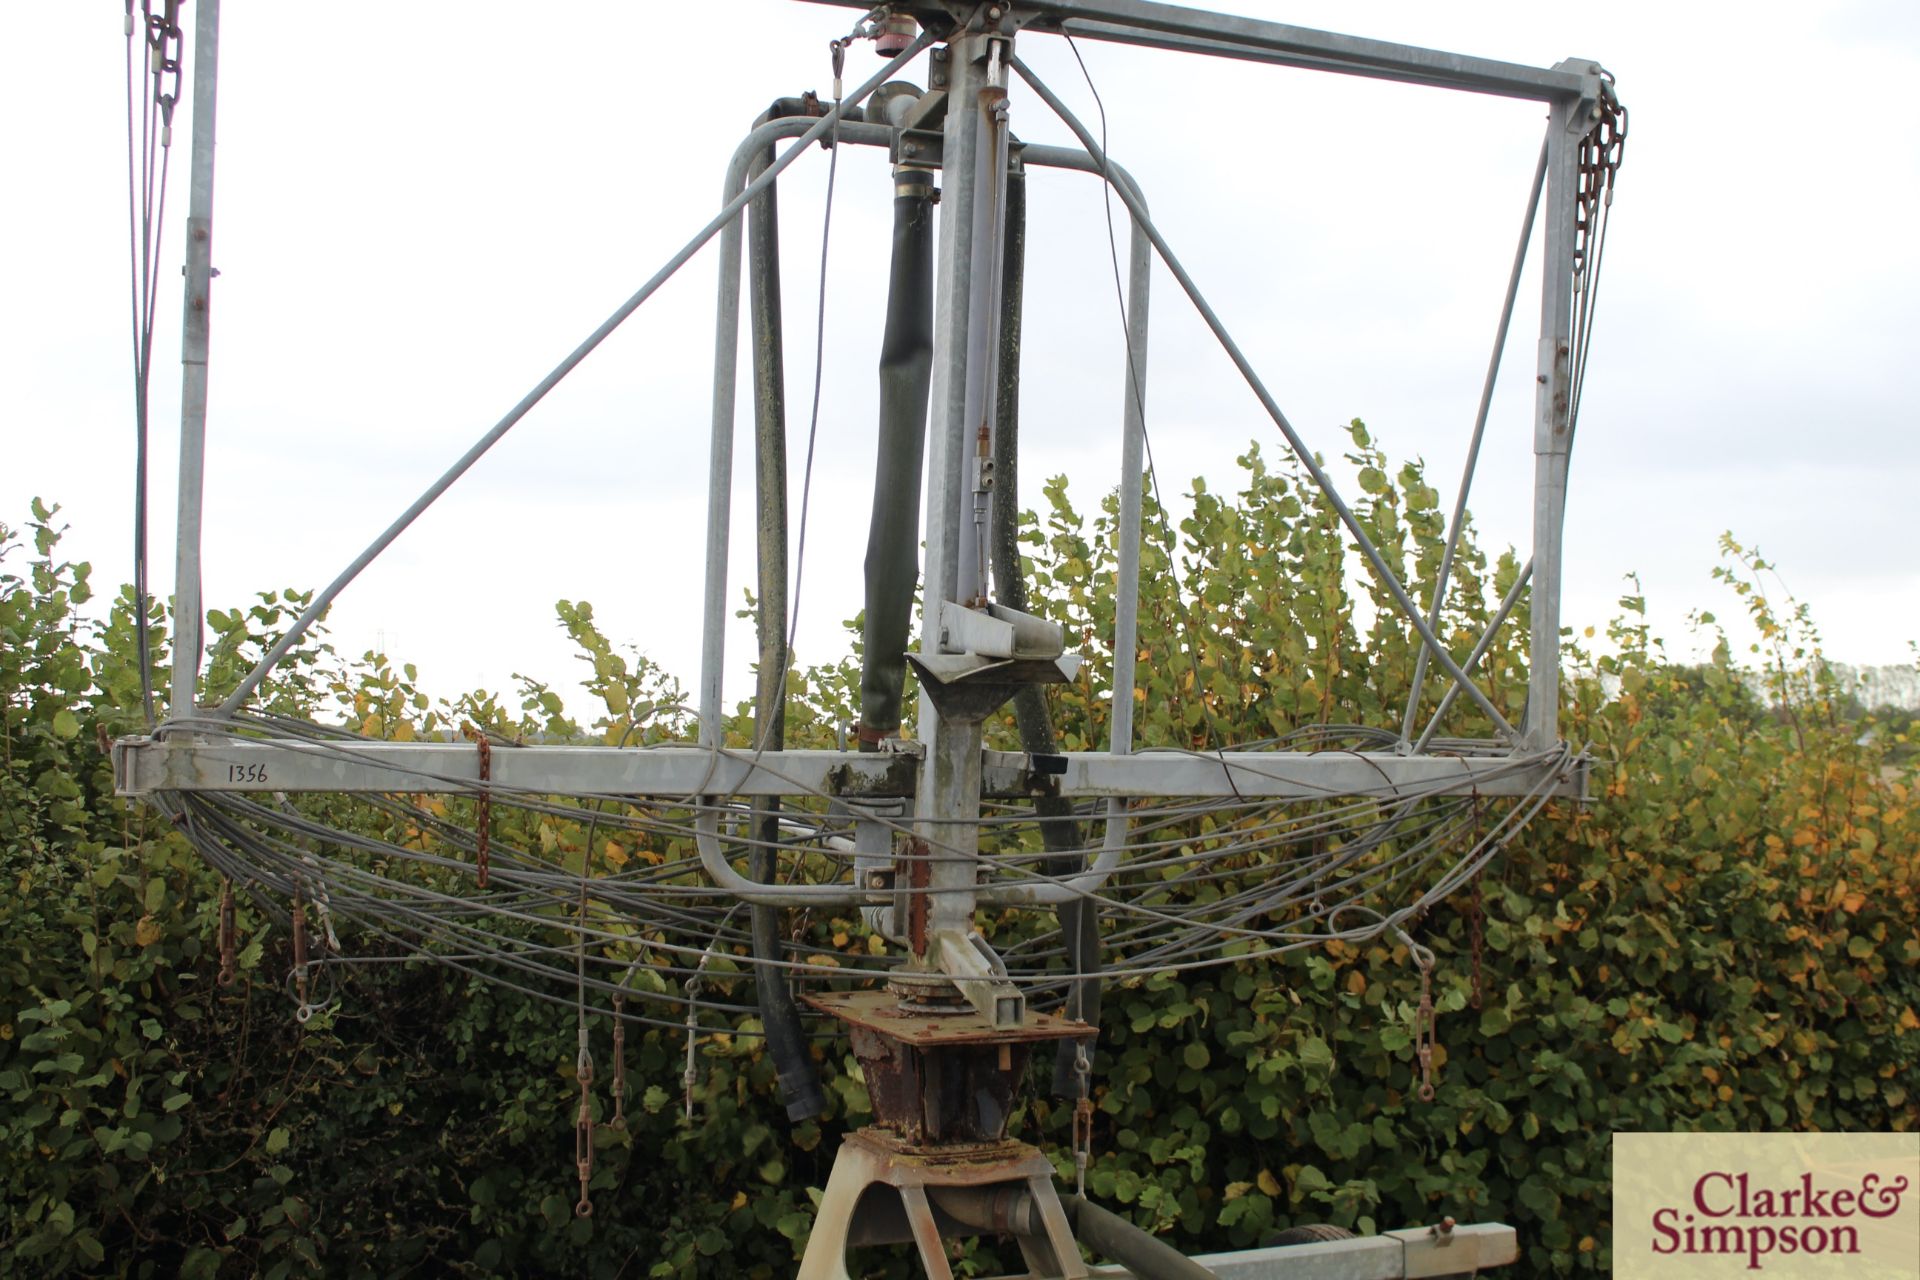 Bauer 64m spray boom irrigator. With 140 rain gun and further full boom section for spares. - Image 7 of 13